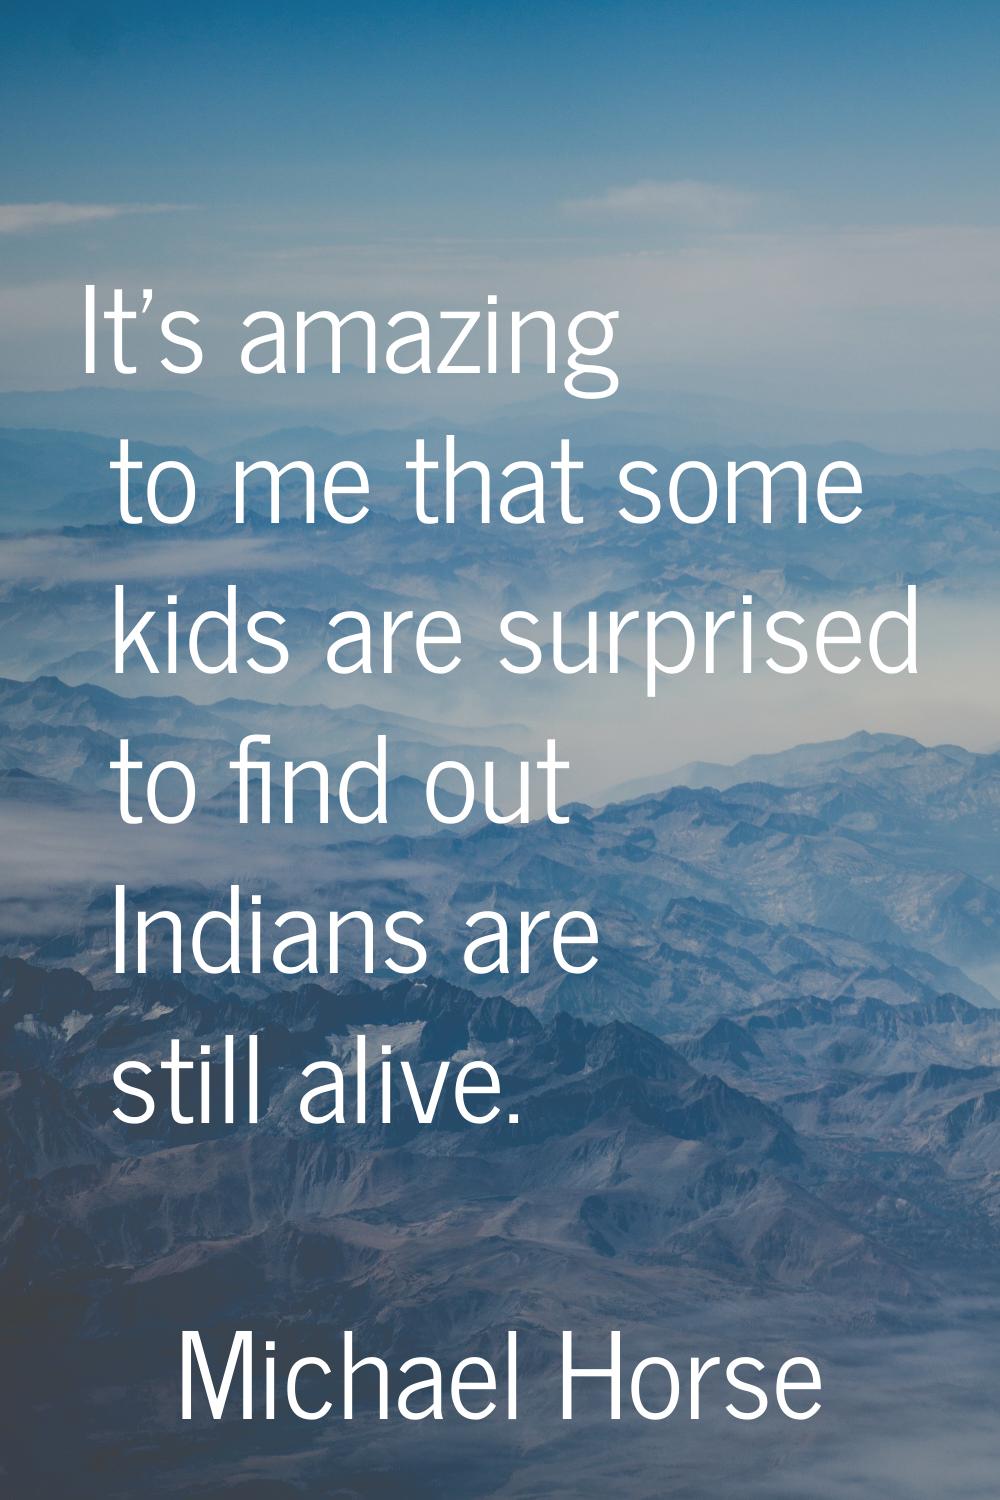 It's amazing to me that some kids are surprised to find out Indians are still alive.